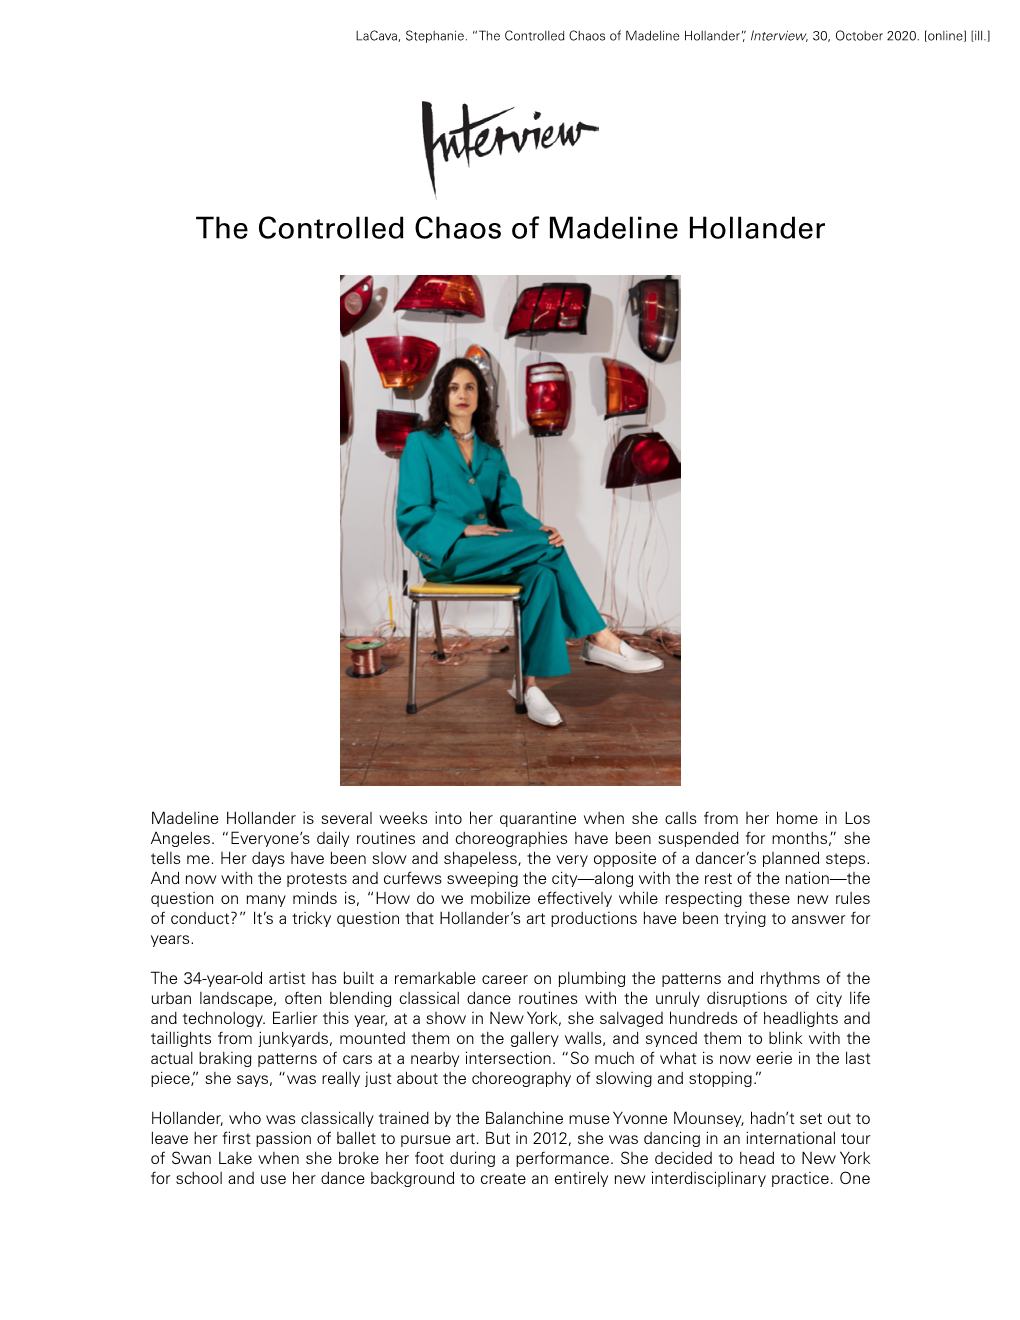 The Controlled Chaos of Madeline Hollander”, Interview, 30, October 2020